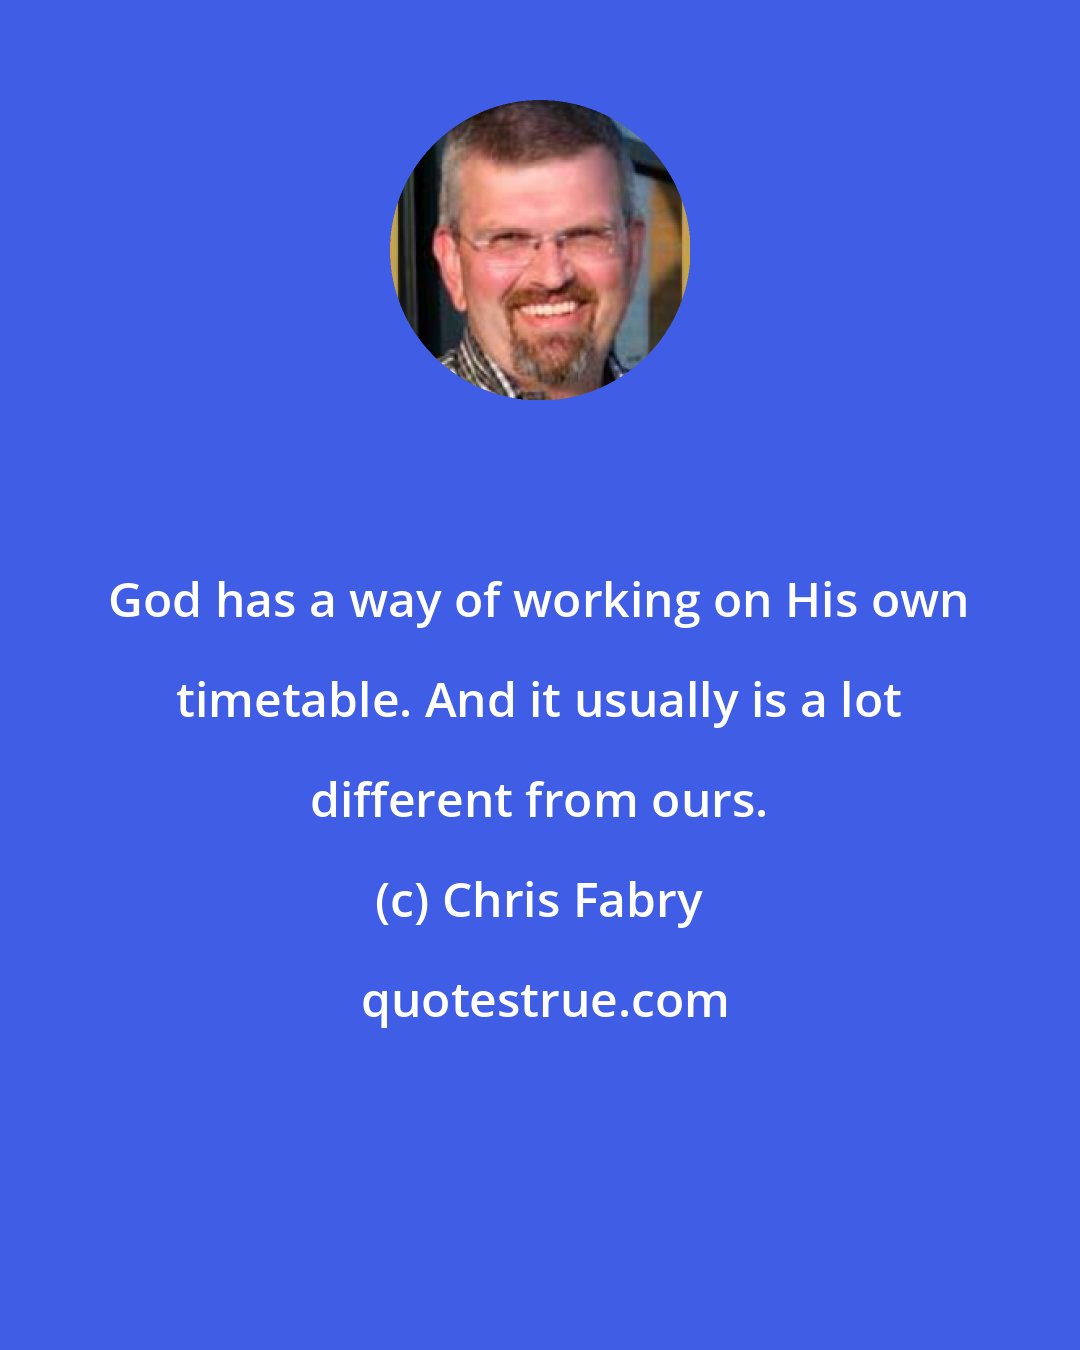 Chris Fabry: God has a way of working on His own timetable. And it usually is a lot different from ours.